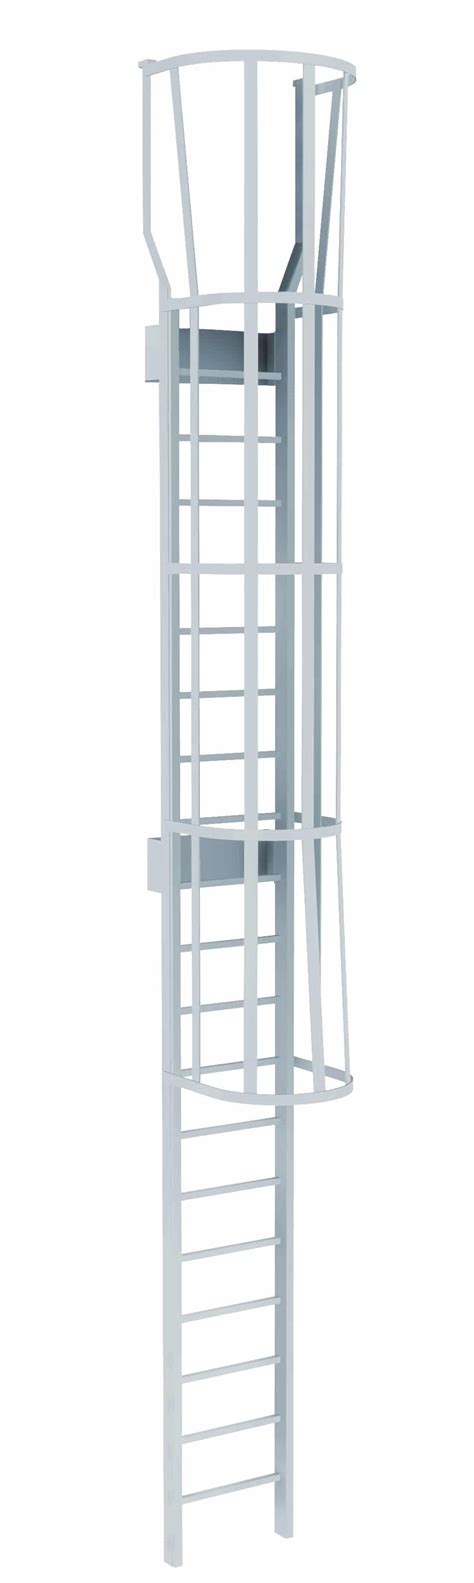 Okeeffes Inc 534 Cage Ladder